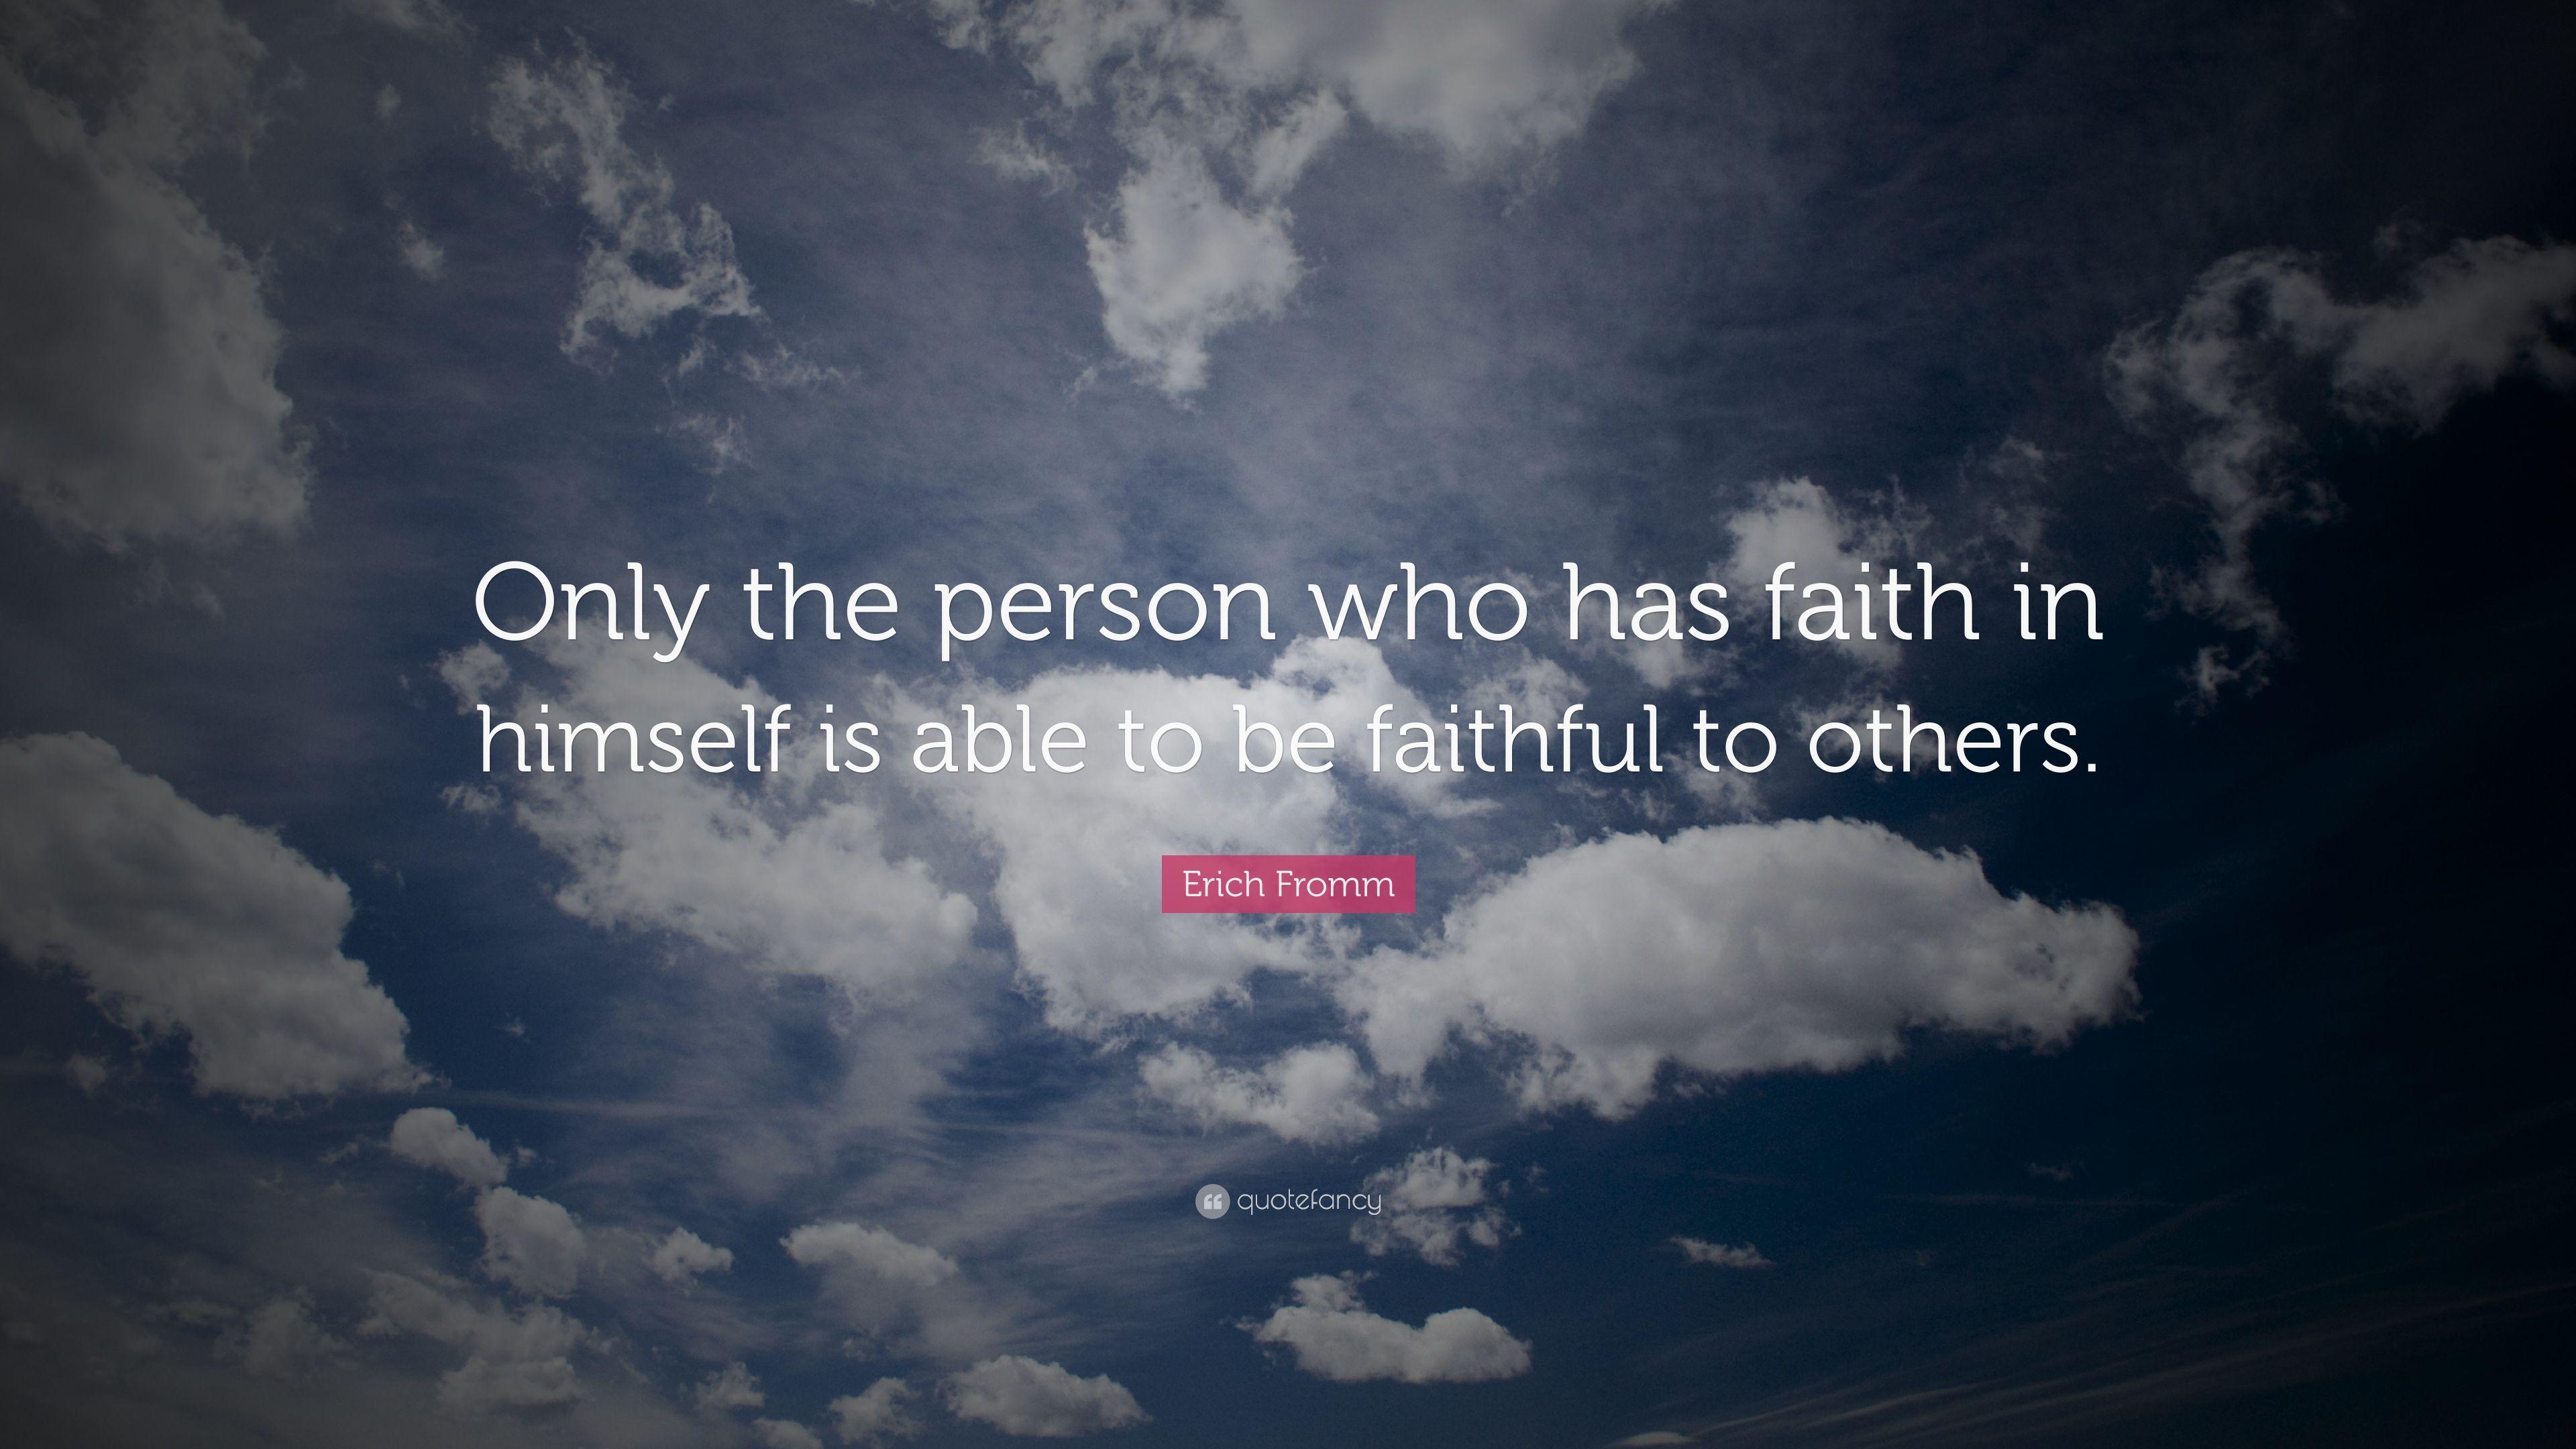 Erich Fromm Quote: “Only the person who has faith in himself is able to be faithful